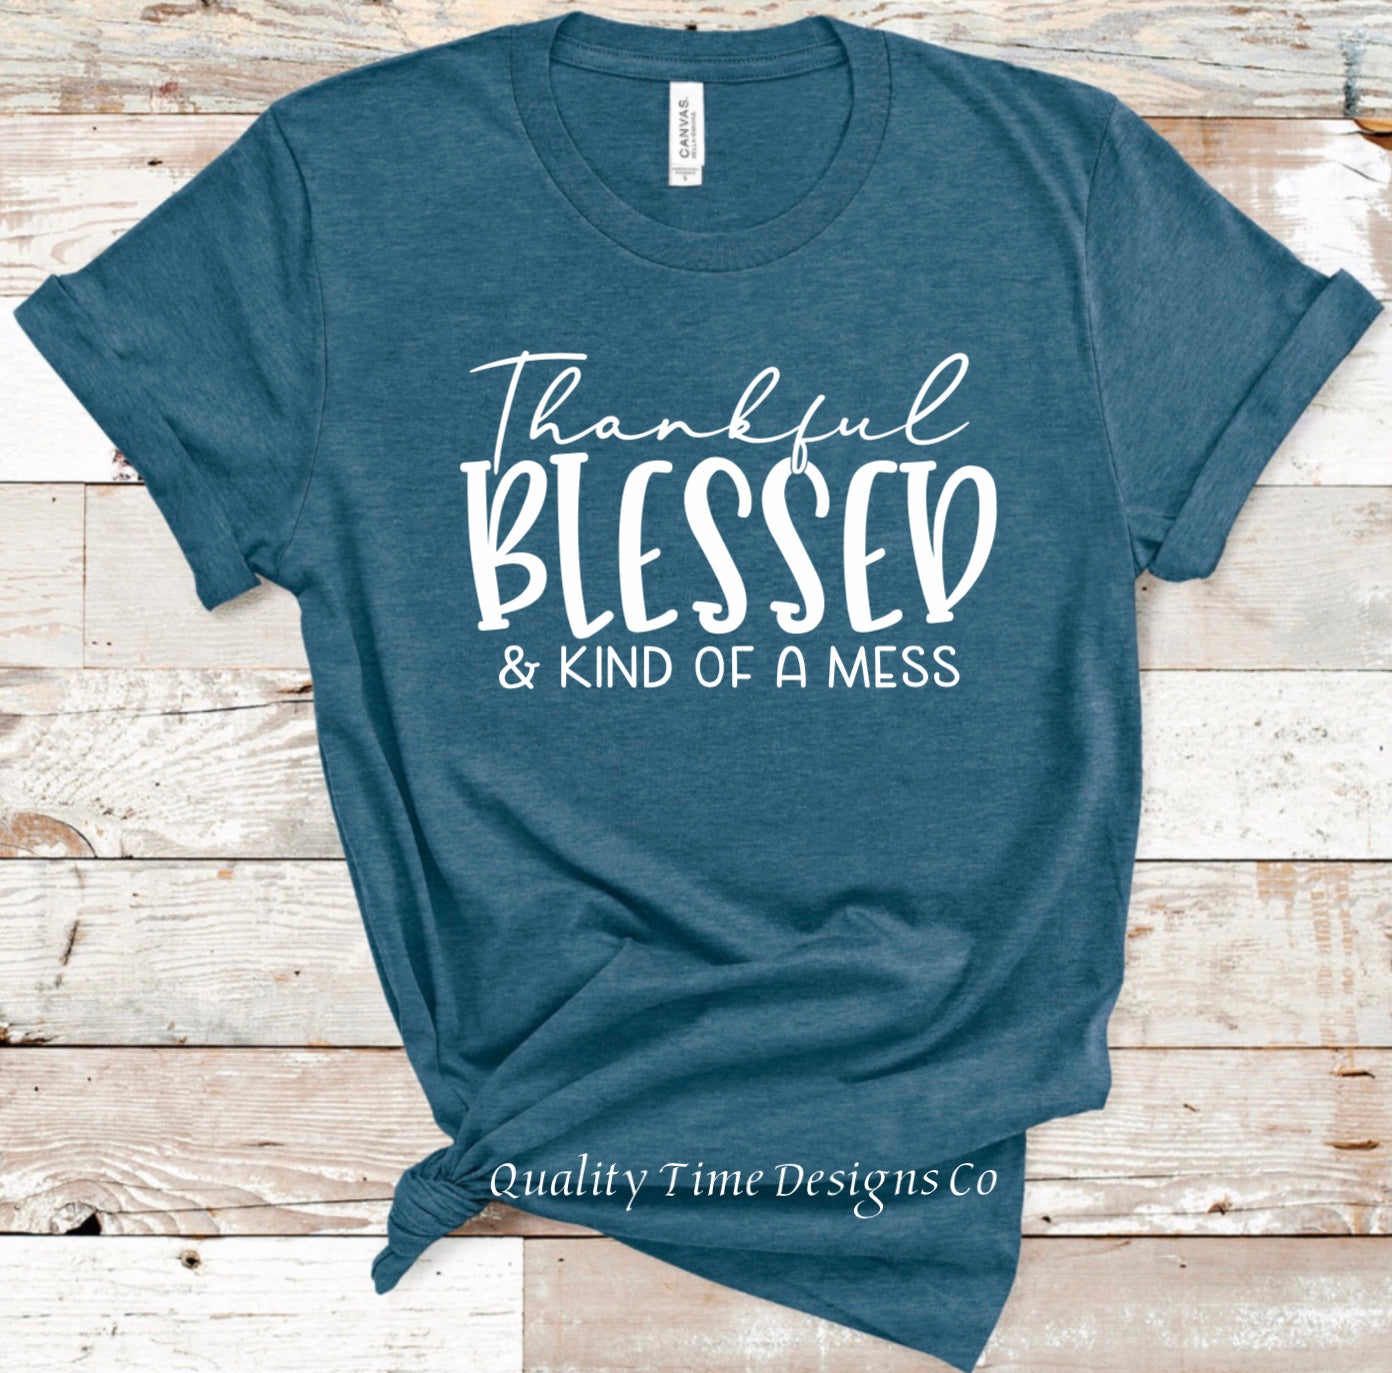 Thankful blessed and kind of a mess t-shirt 